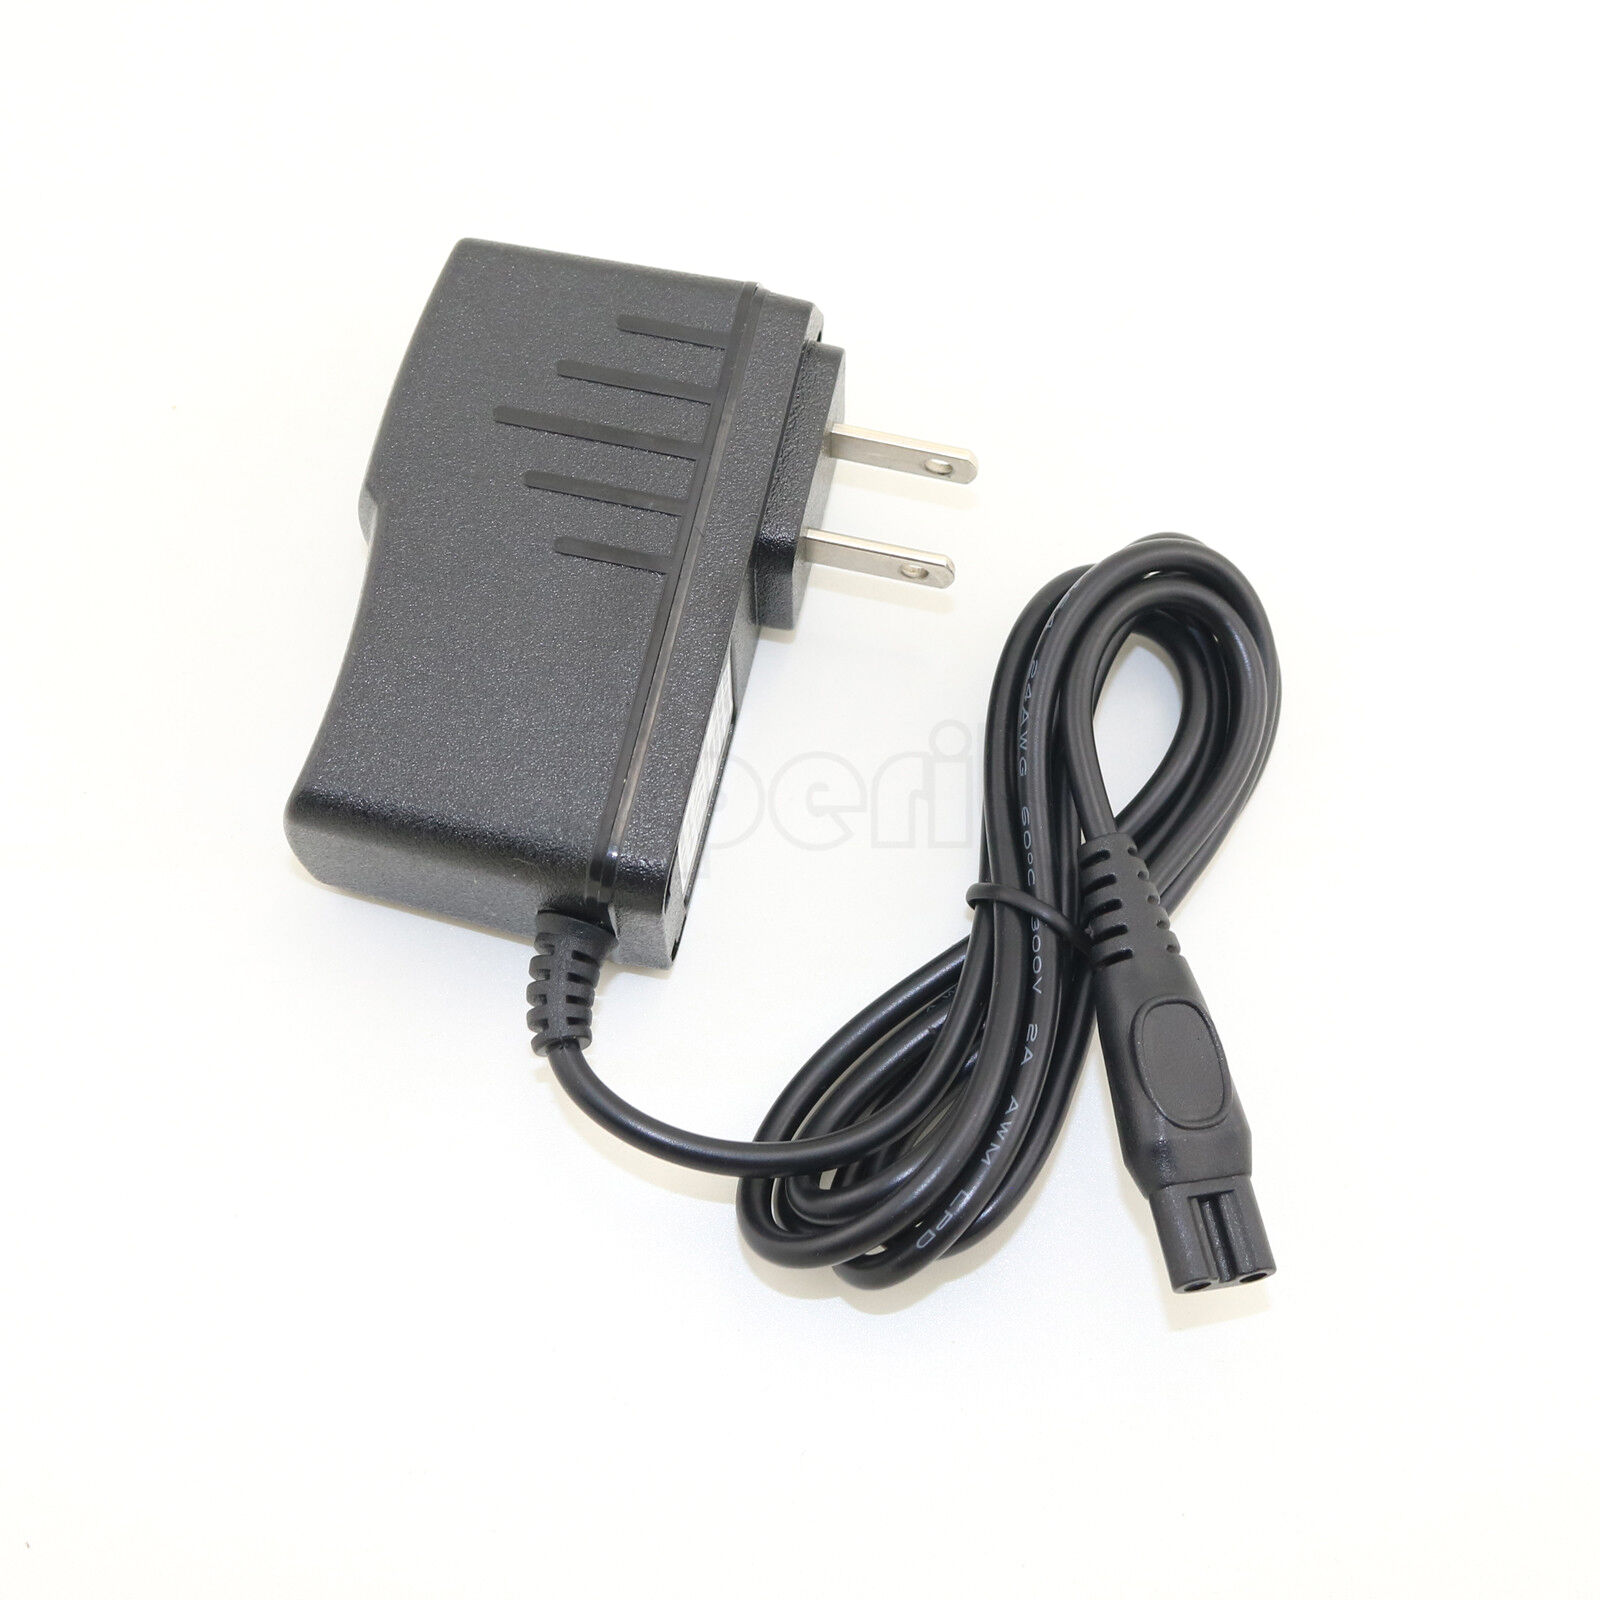 Power Adapter AC Charger Cord For Philips Norelco 9000 9700 Series S9721 AT811 Power Adapter AC Charger Cord For Philip - Click Image to Close